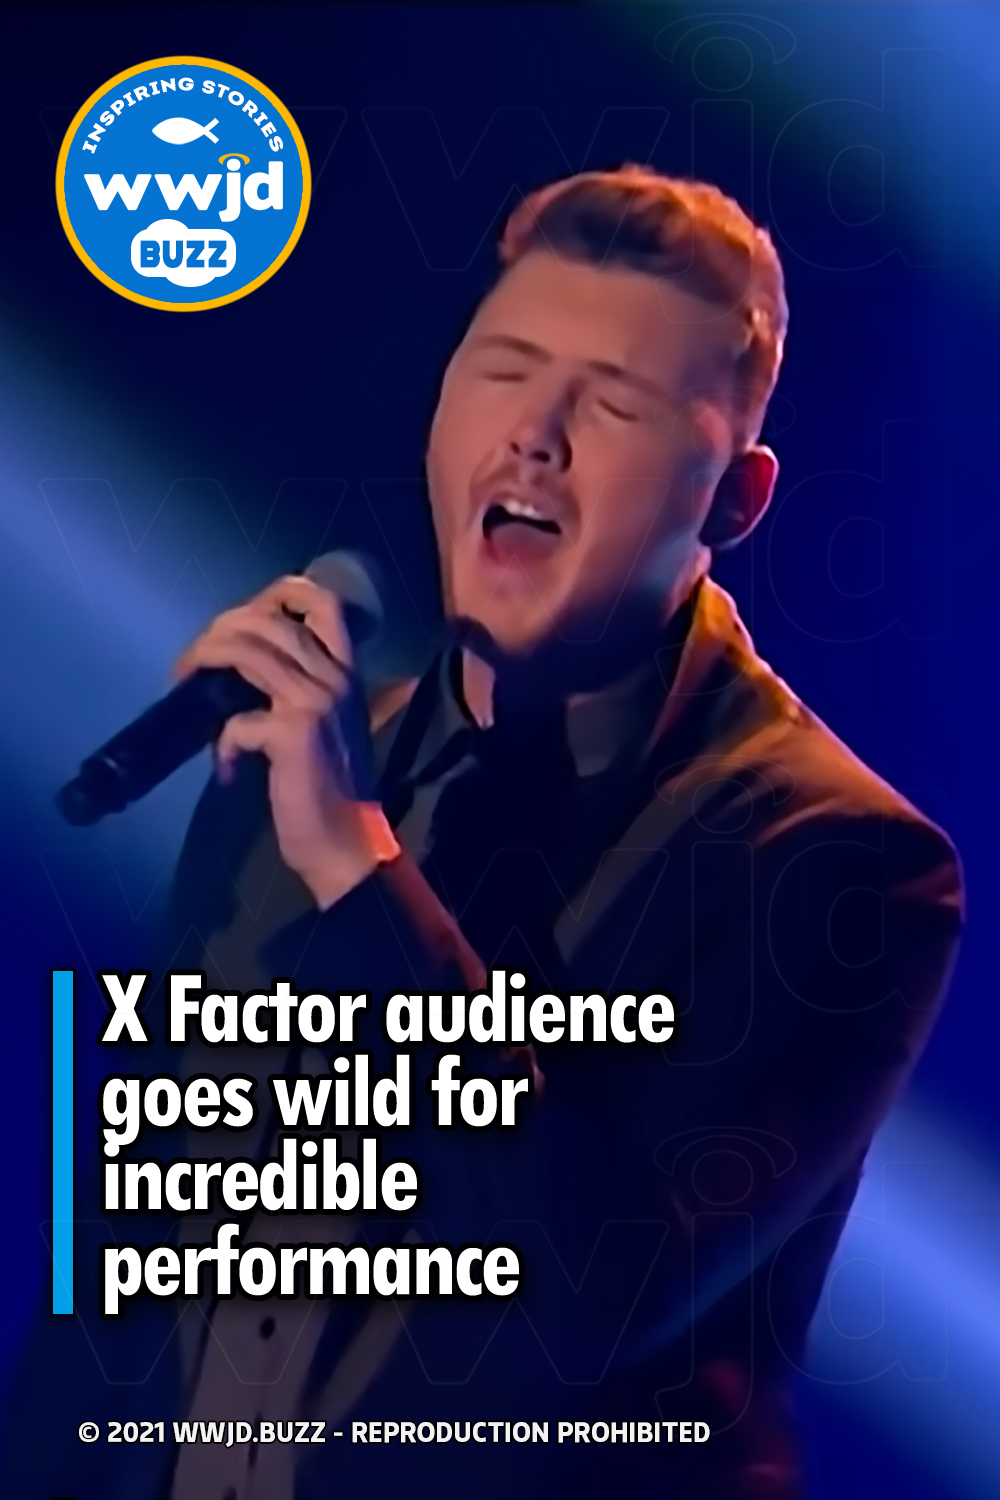 X Factor audience goes wild for incredible performance